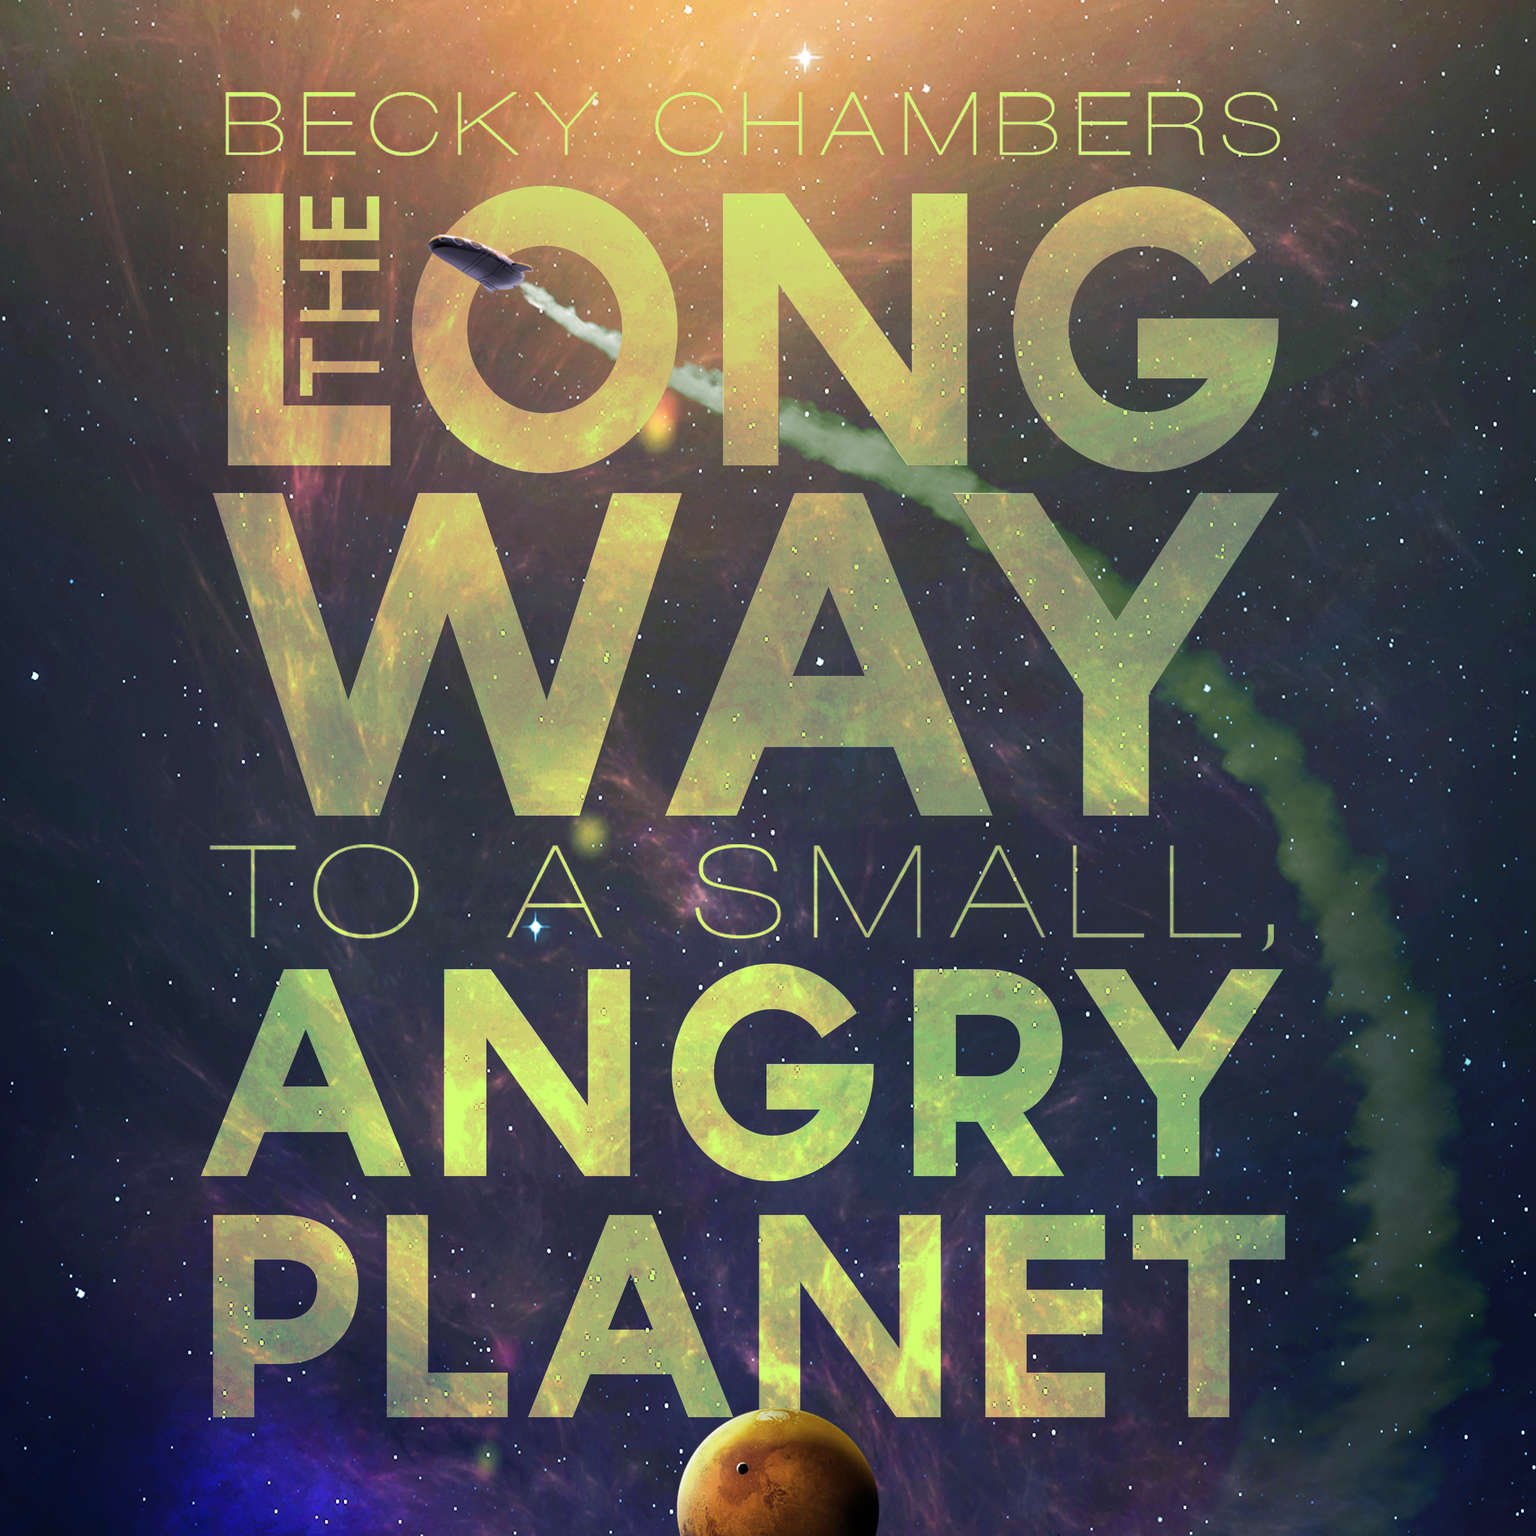 long journey to a small angry planet